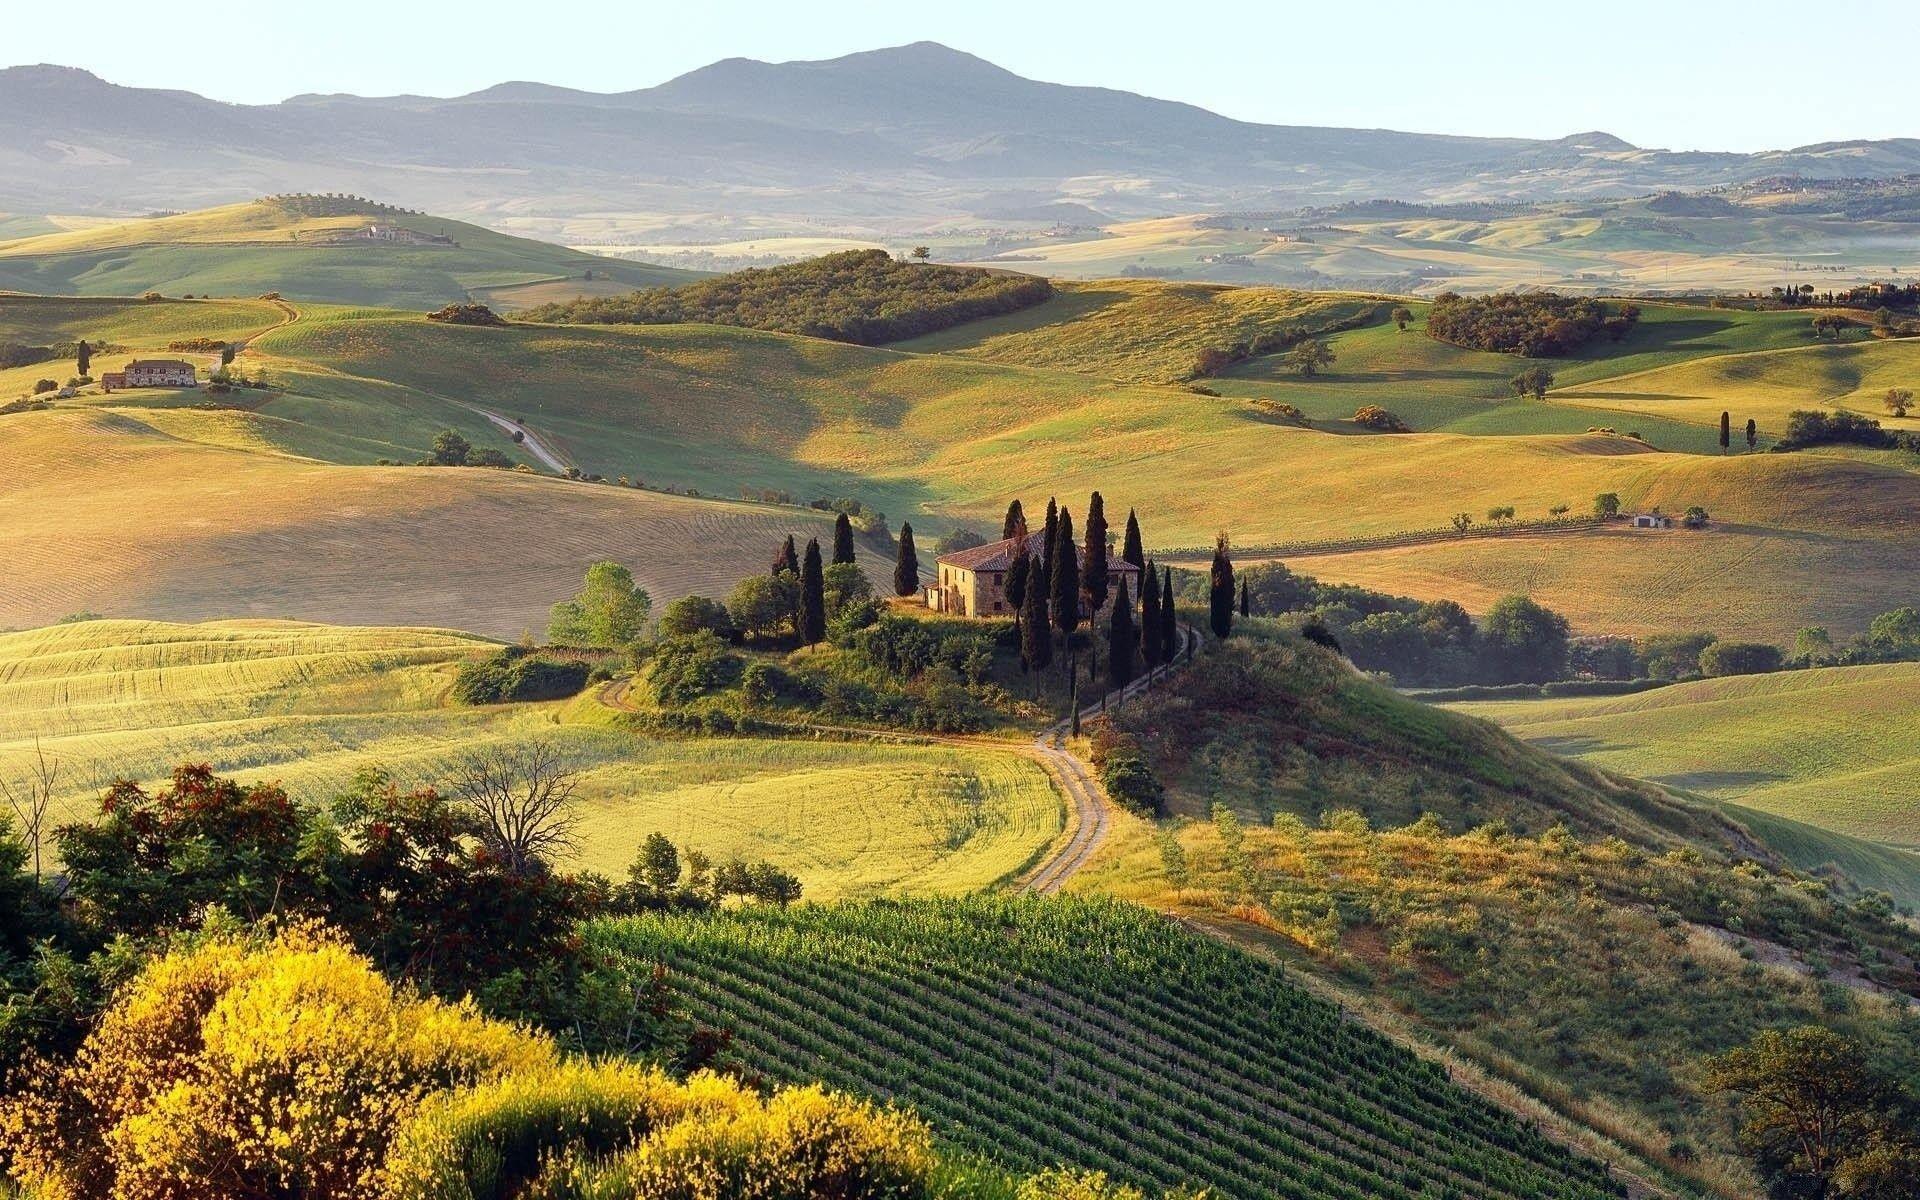 Landscape, Italy. Android wallpaper for free